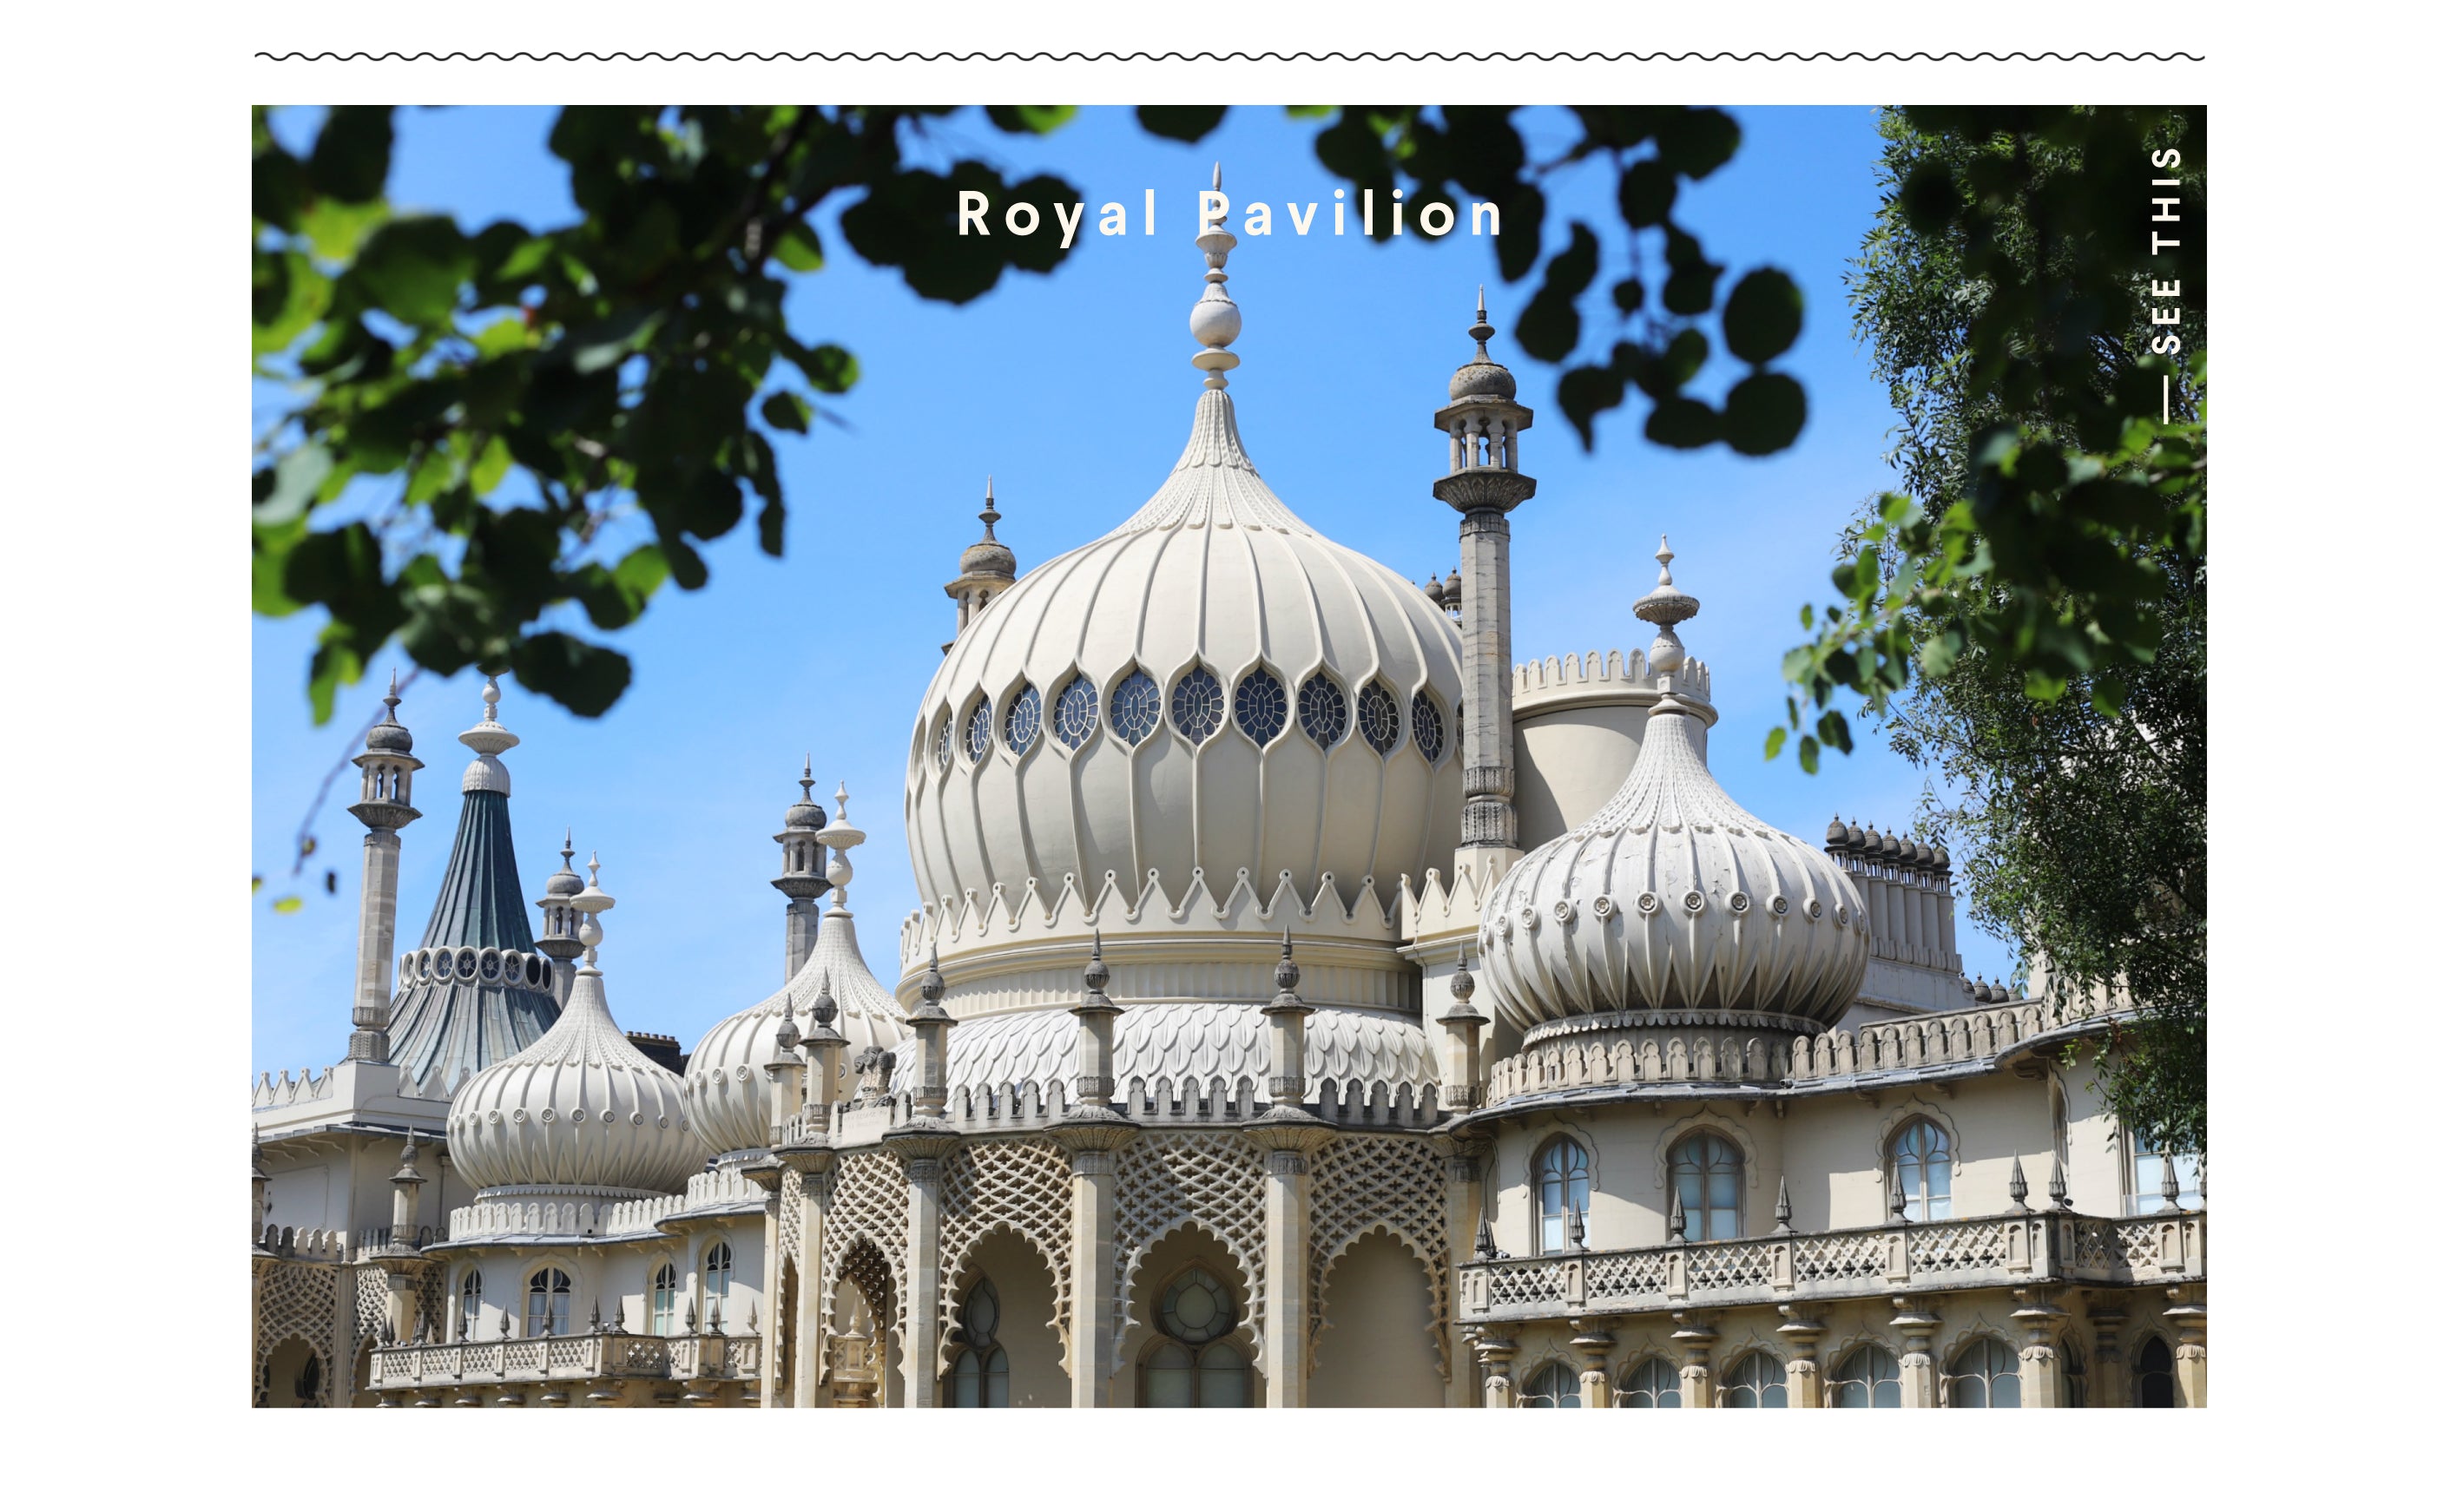 Lazy Guide to Brighton